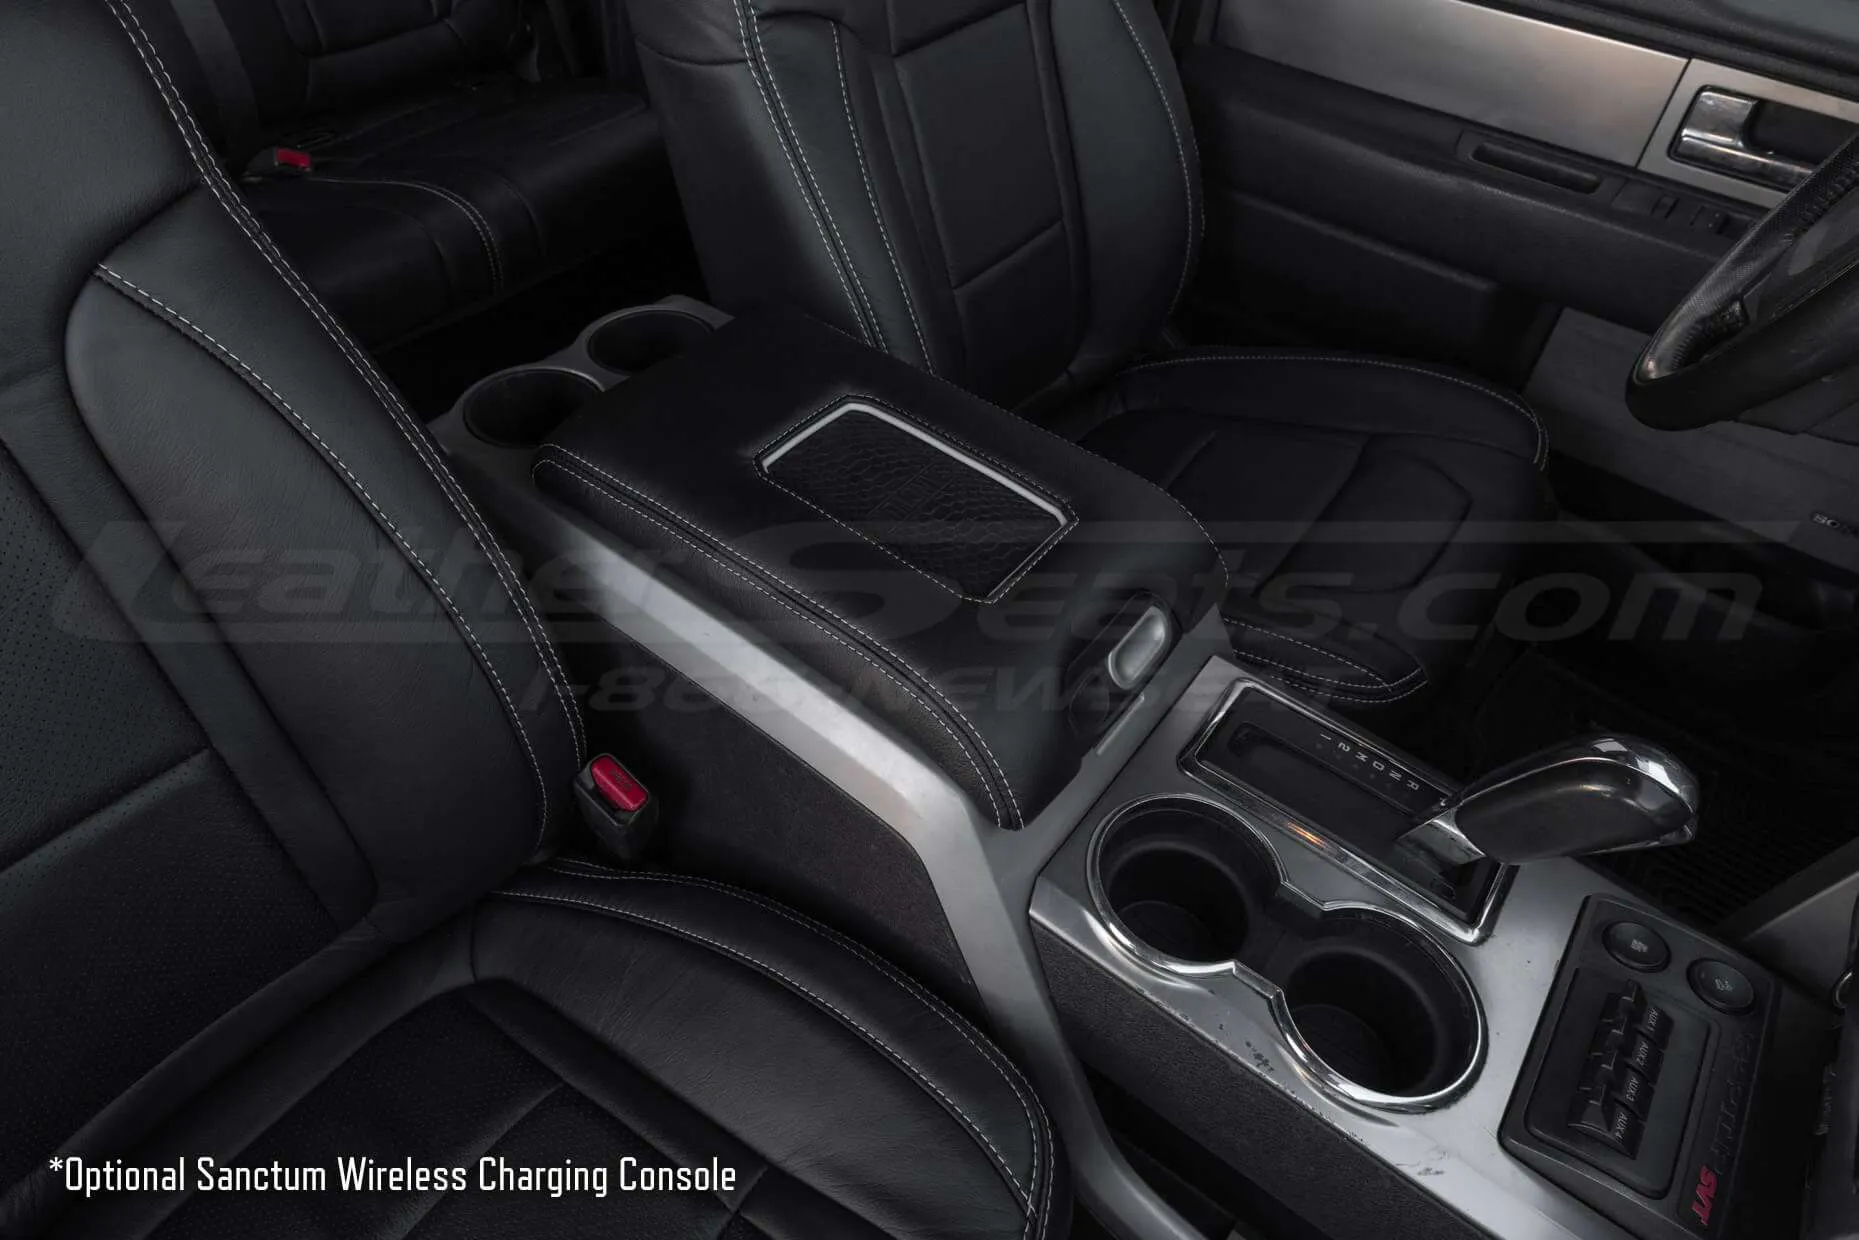 Passenger side wide angle of Sanctum Wireless Charging Console